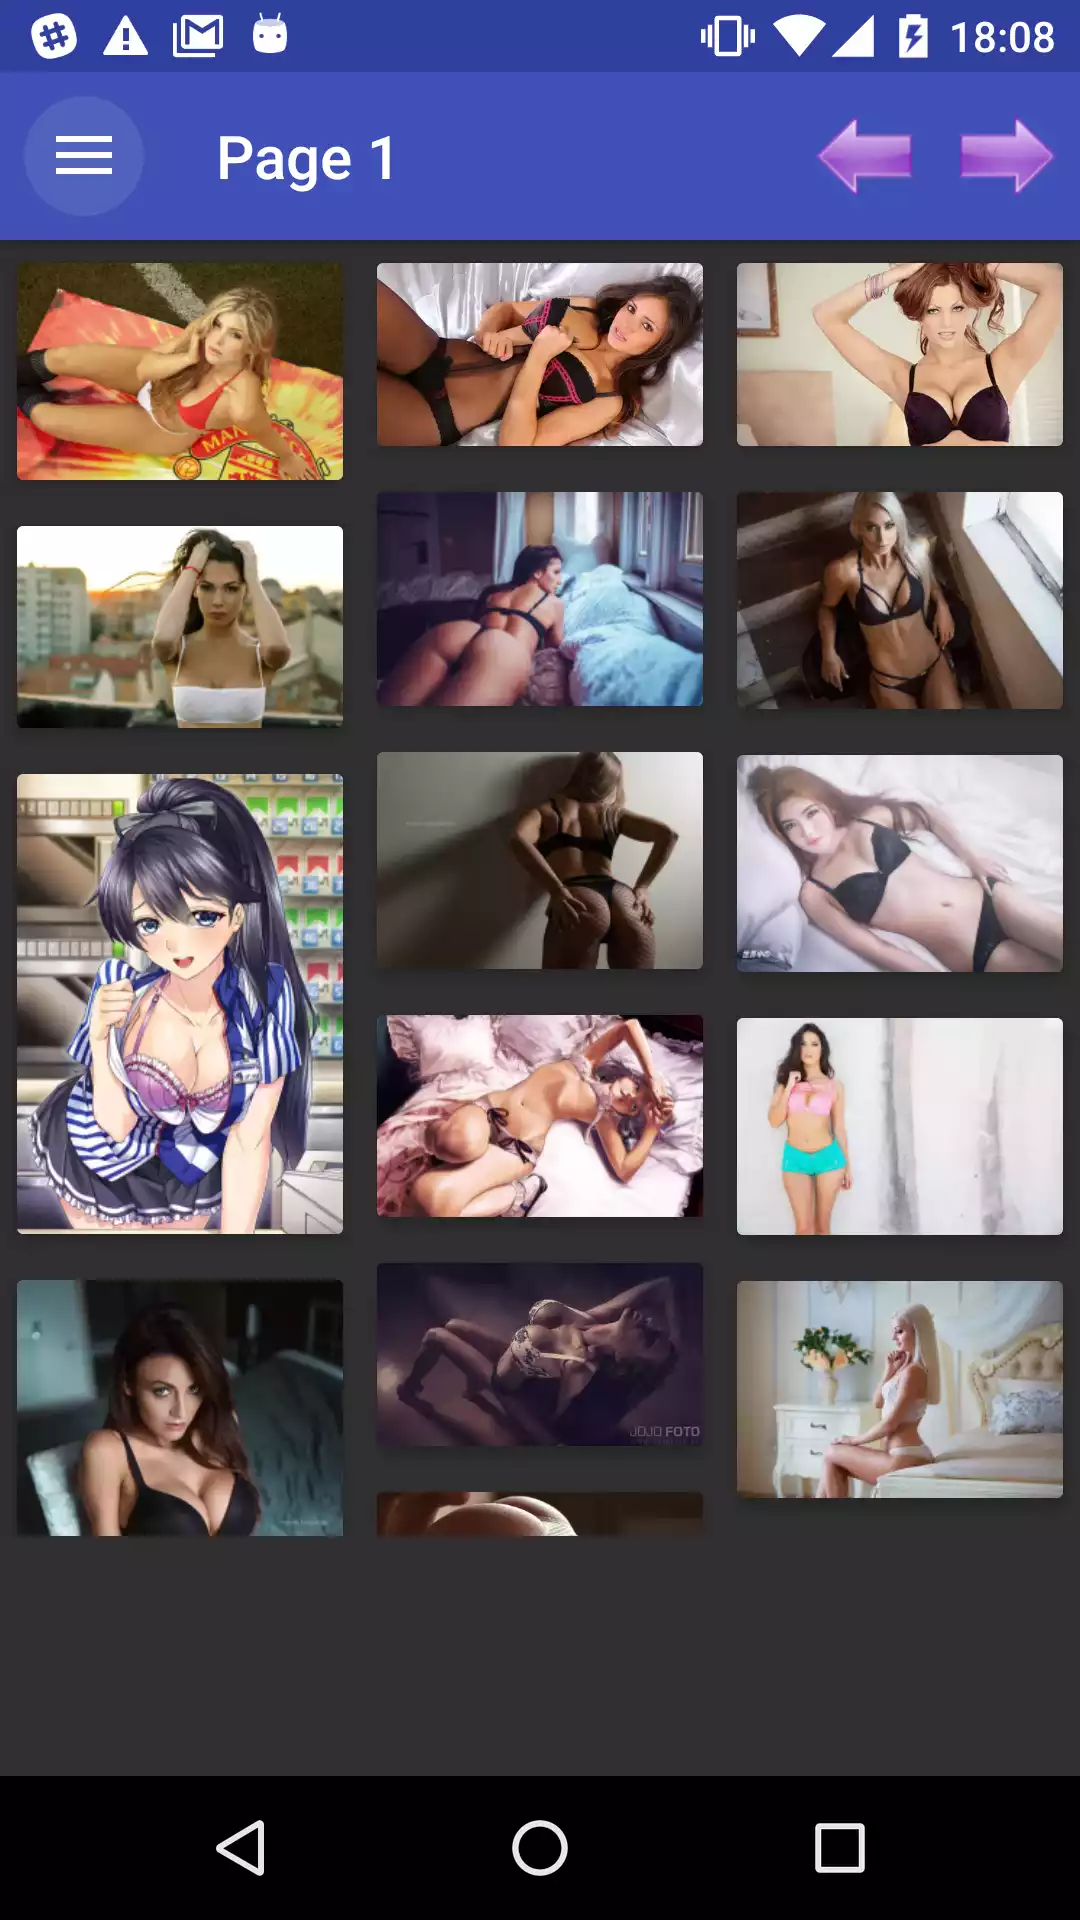 Bra Wallpapers porn,sexy,the,best,app,new,beta,gallery,android,wallpapers,hentie,images,puzzle,pic,backgrounds,erotic,photos,download,wallpaper,game,viewer,pornstar,hentai,pics